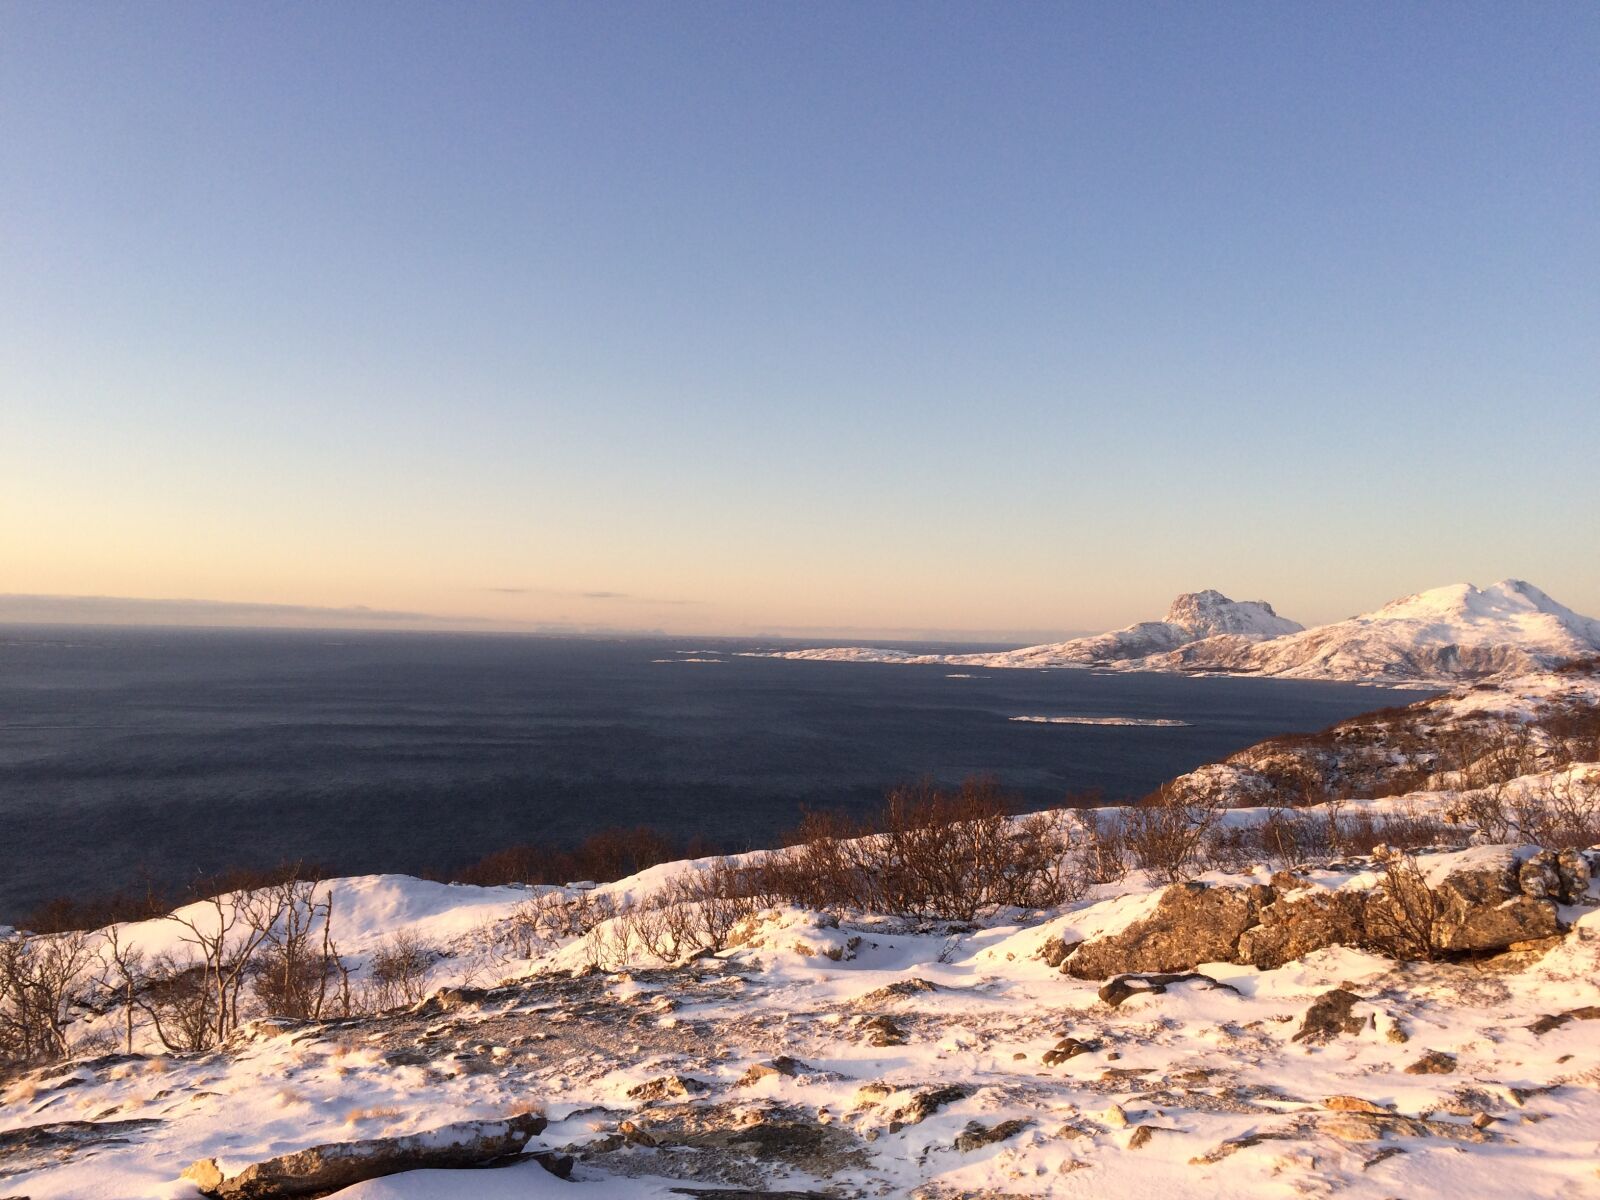 Apple iPhone 5s sample photo. Norway, bodø, winter photography